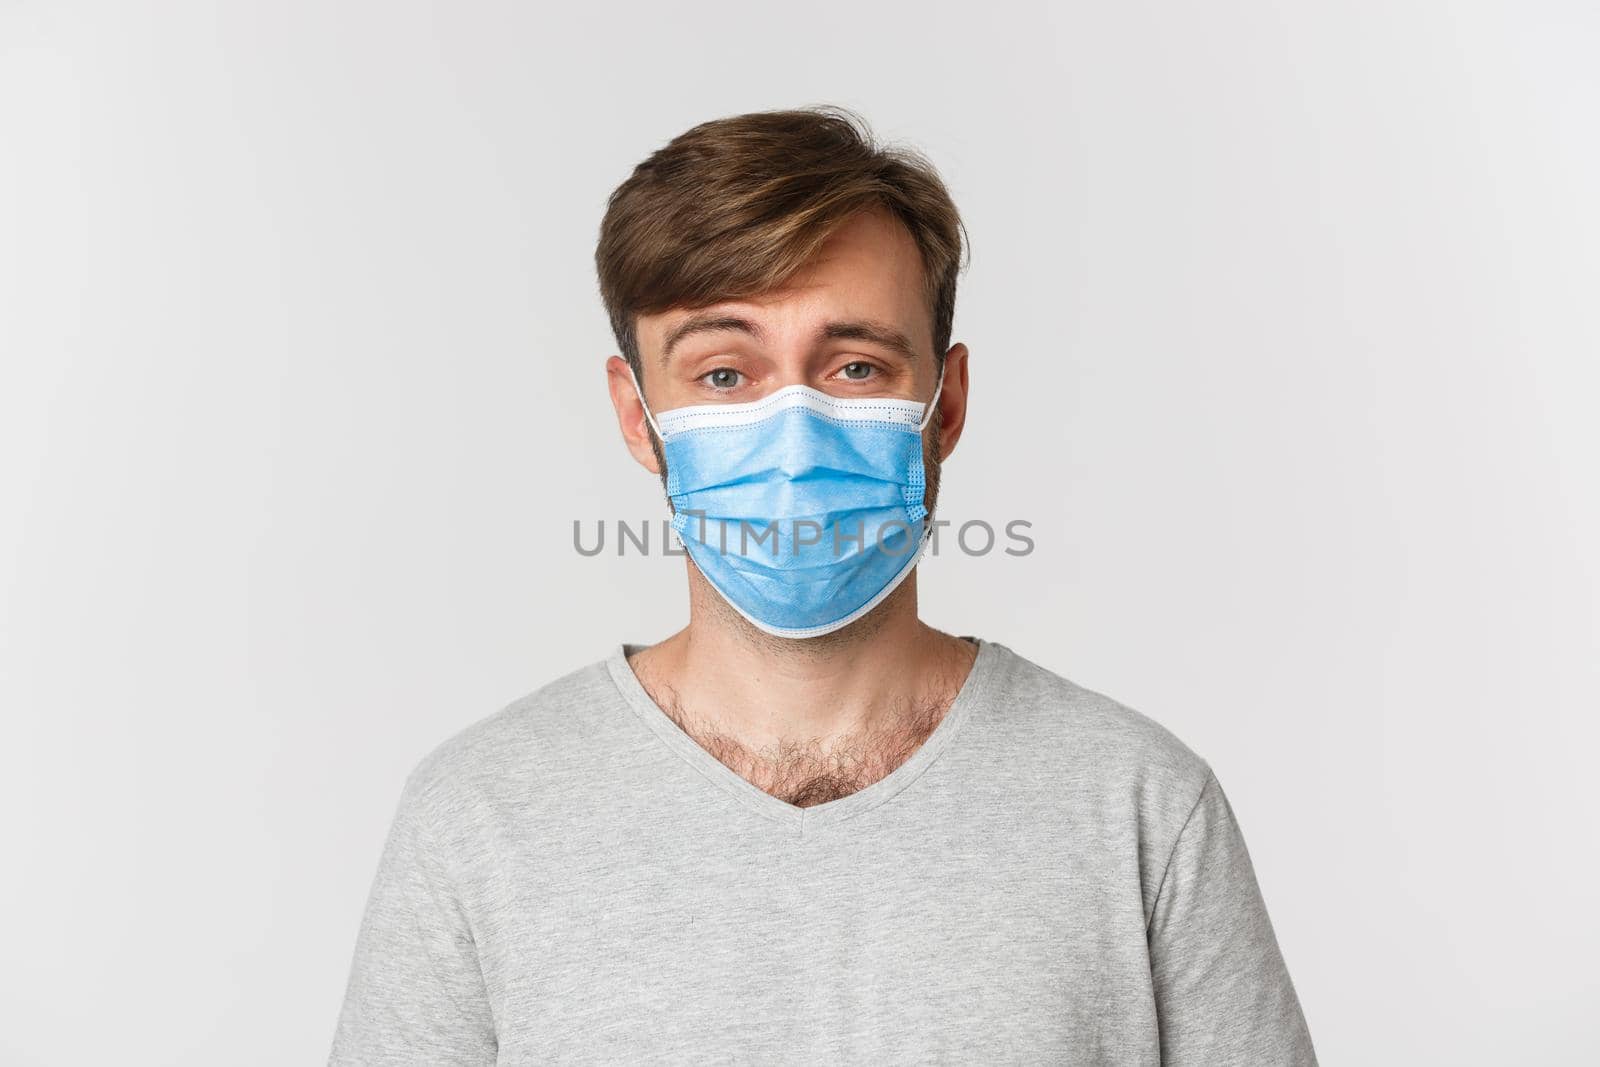 Concept of pandemic, covid-19 and social-distancing. Close-up of skeptical guy in medical mask, raising eyebrow and looking unamused, standing over white background.